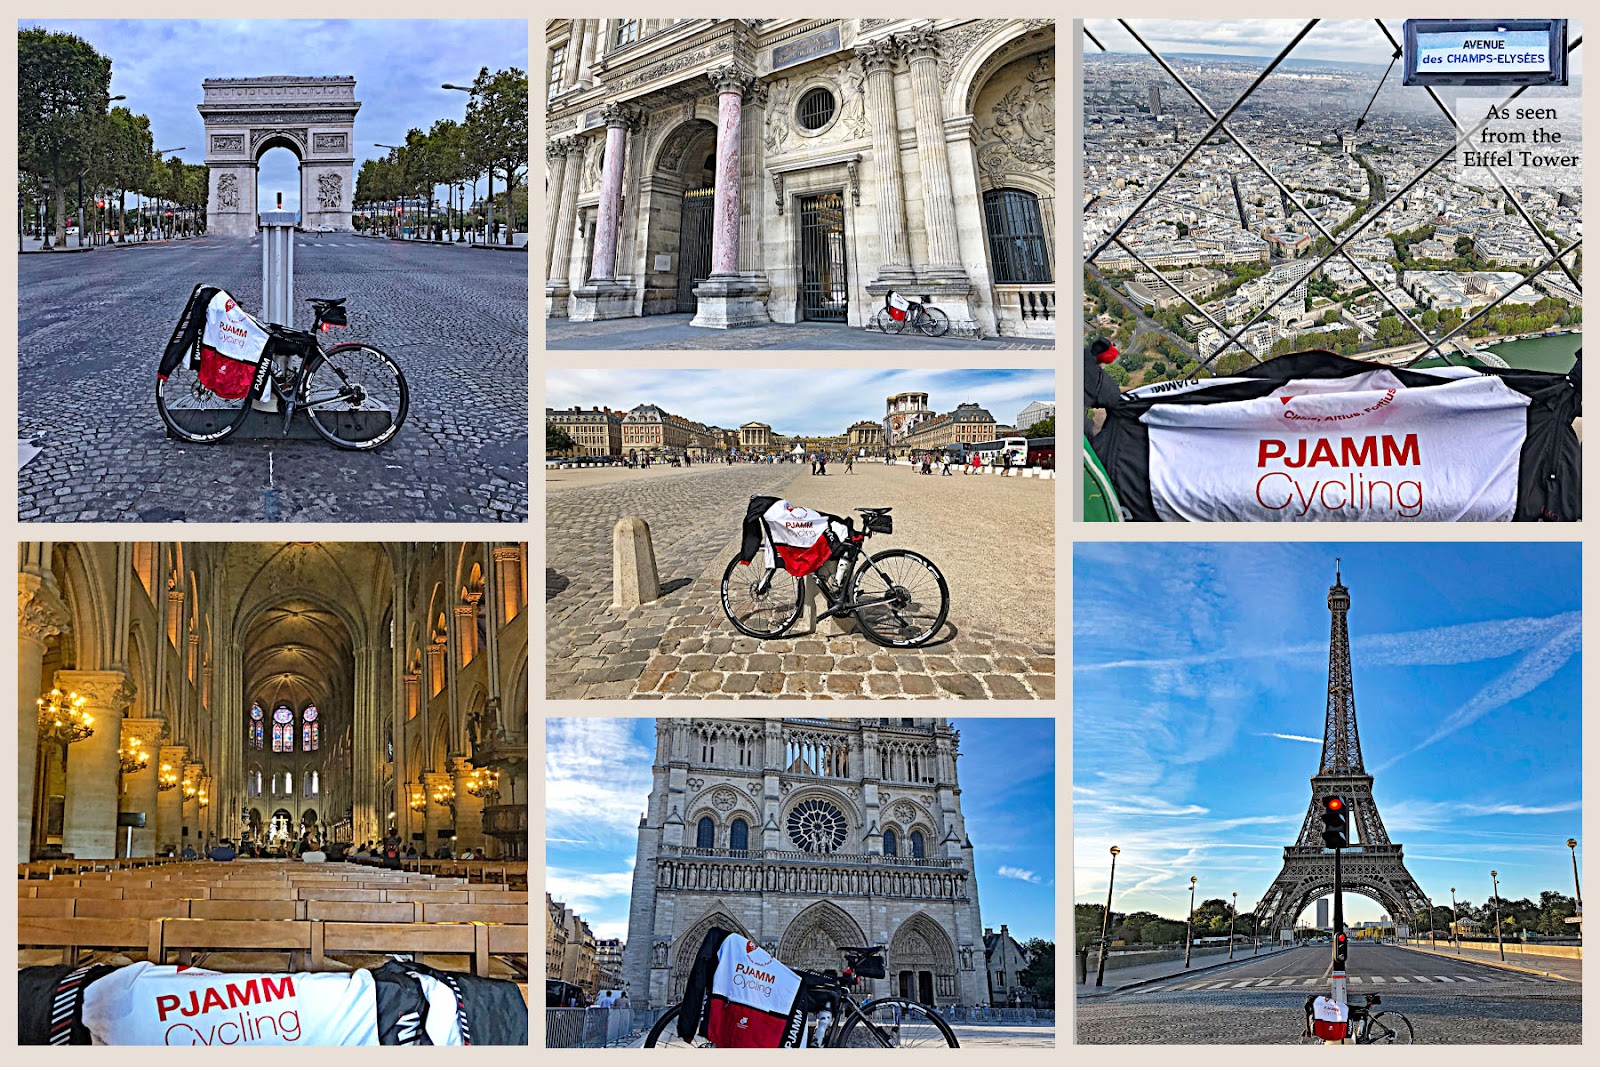 photo collage shows PJAMM bike and jersey at various locations in Paris: Eiffel Tower, Arc de Triumph, Notre Dam Cathedral